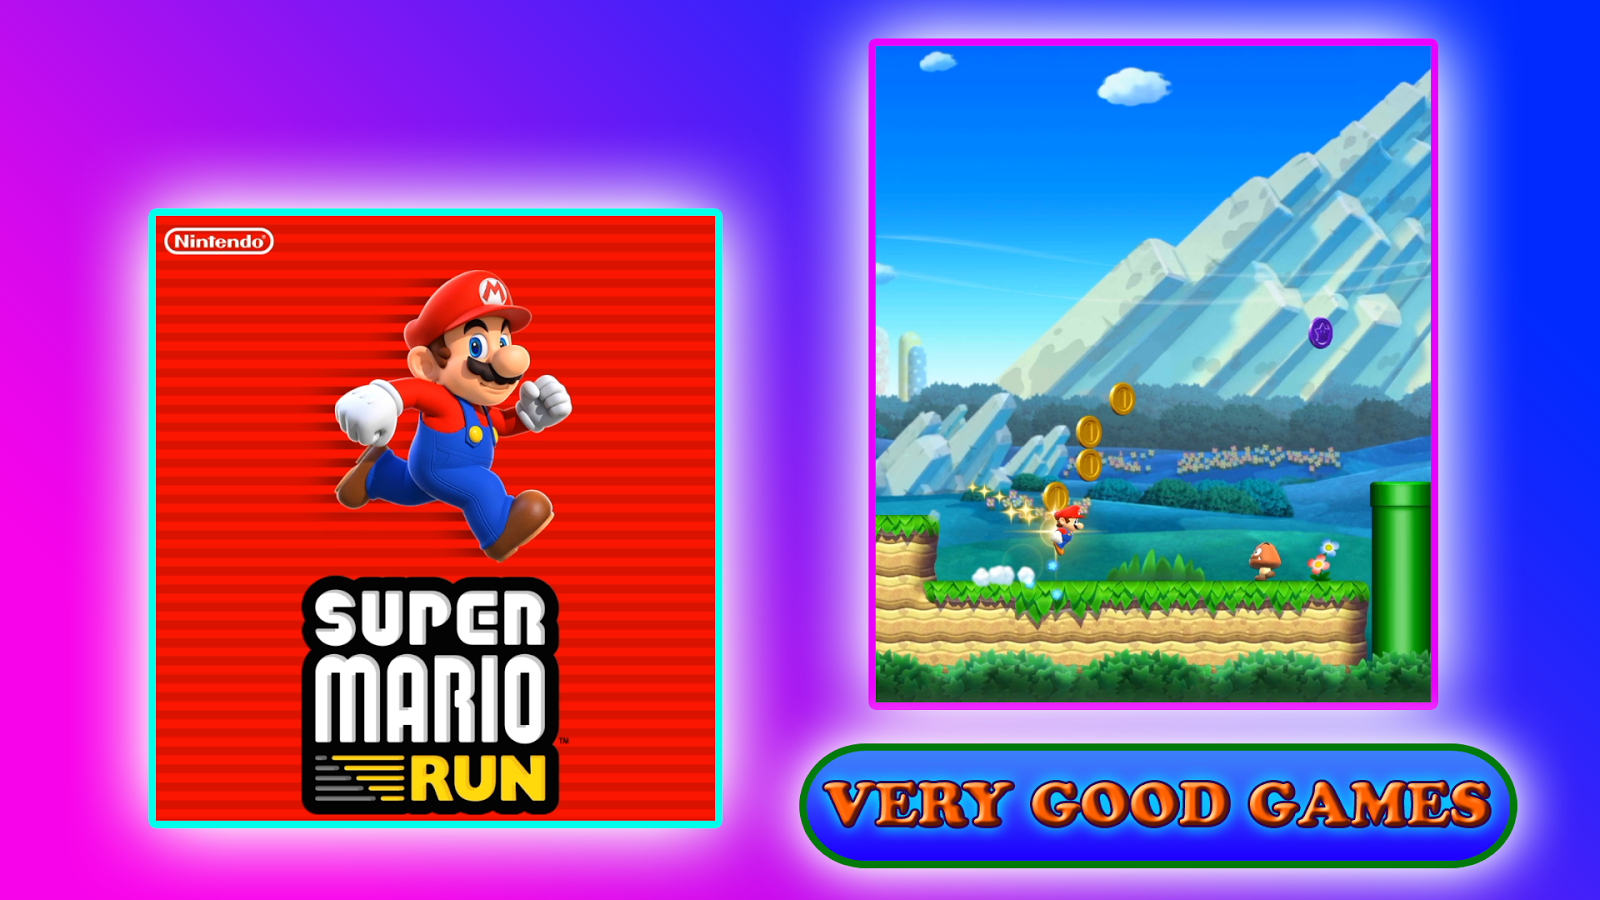 Play Super Mario Run on Android tablets and smartphones, on iPad and iPhone